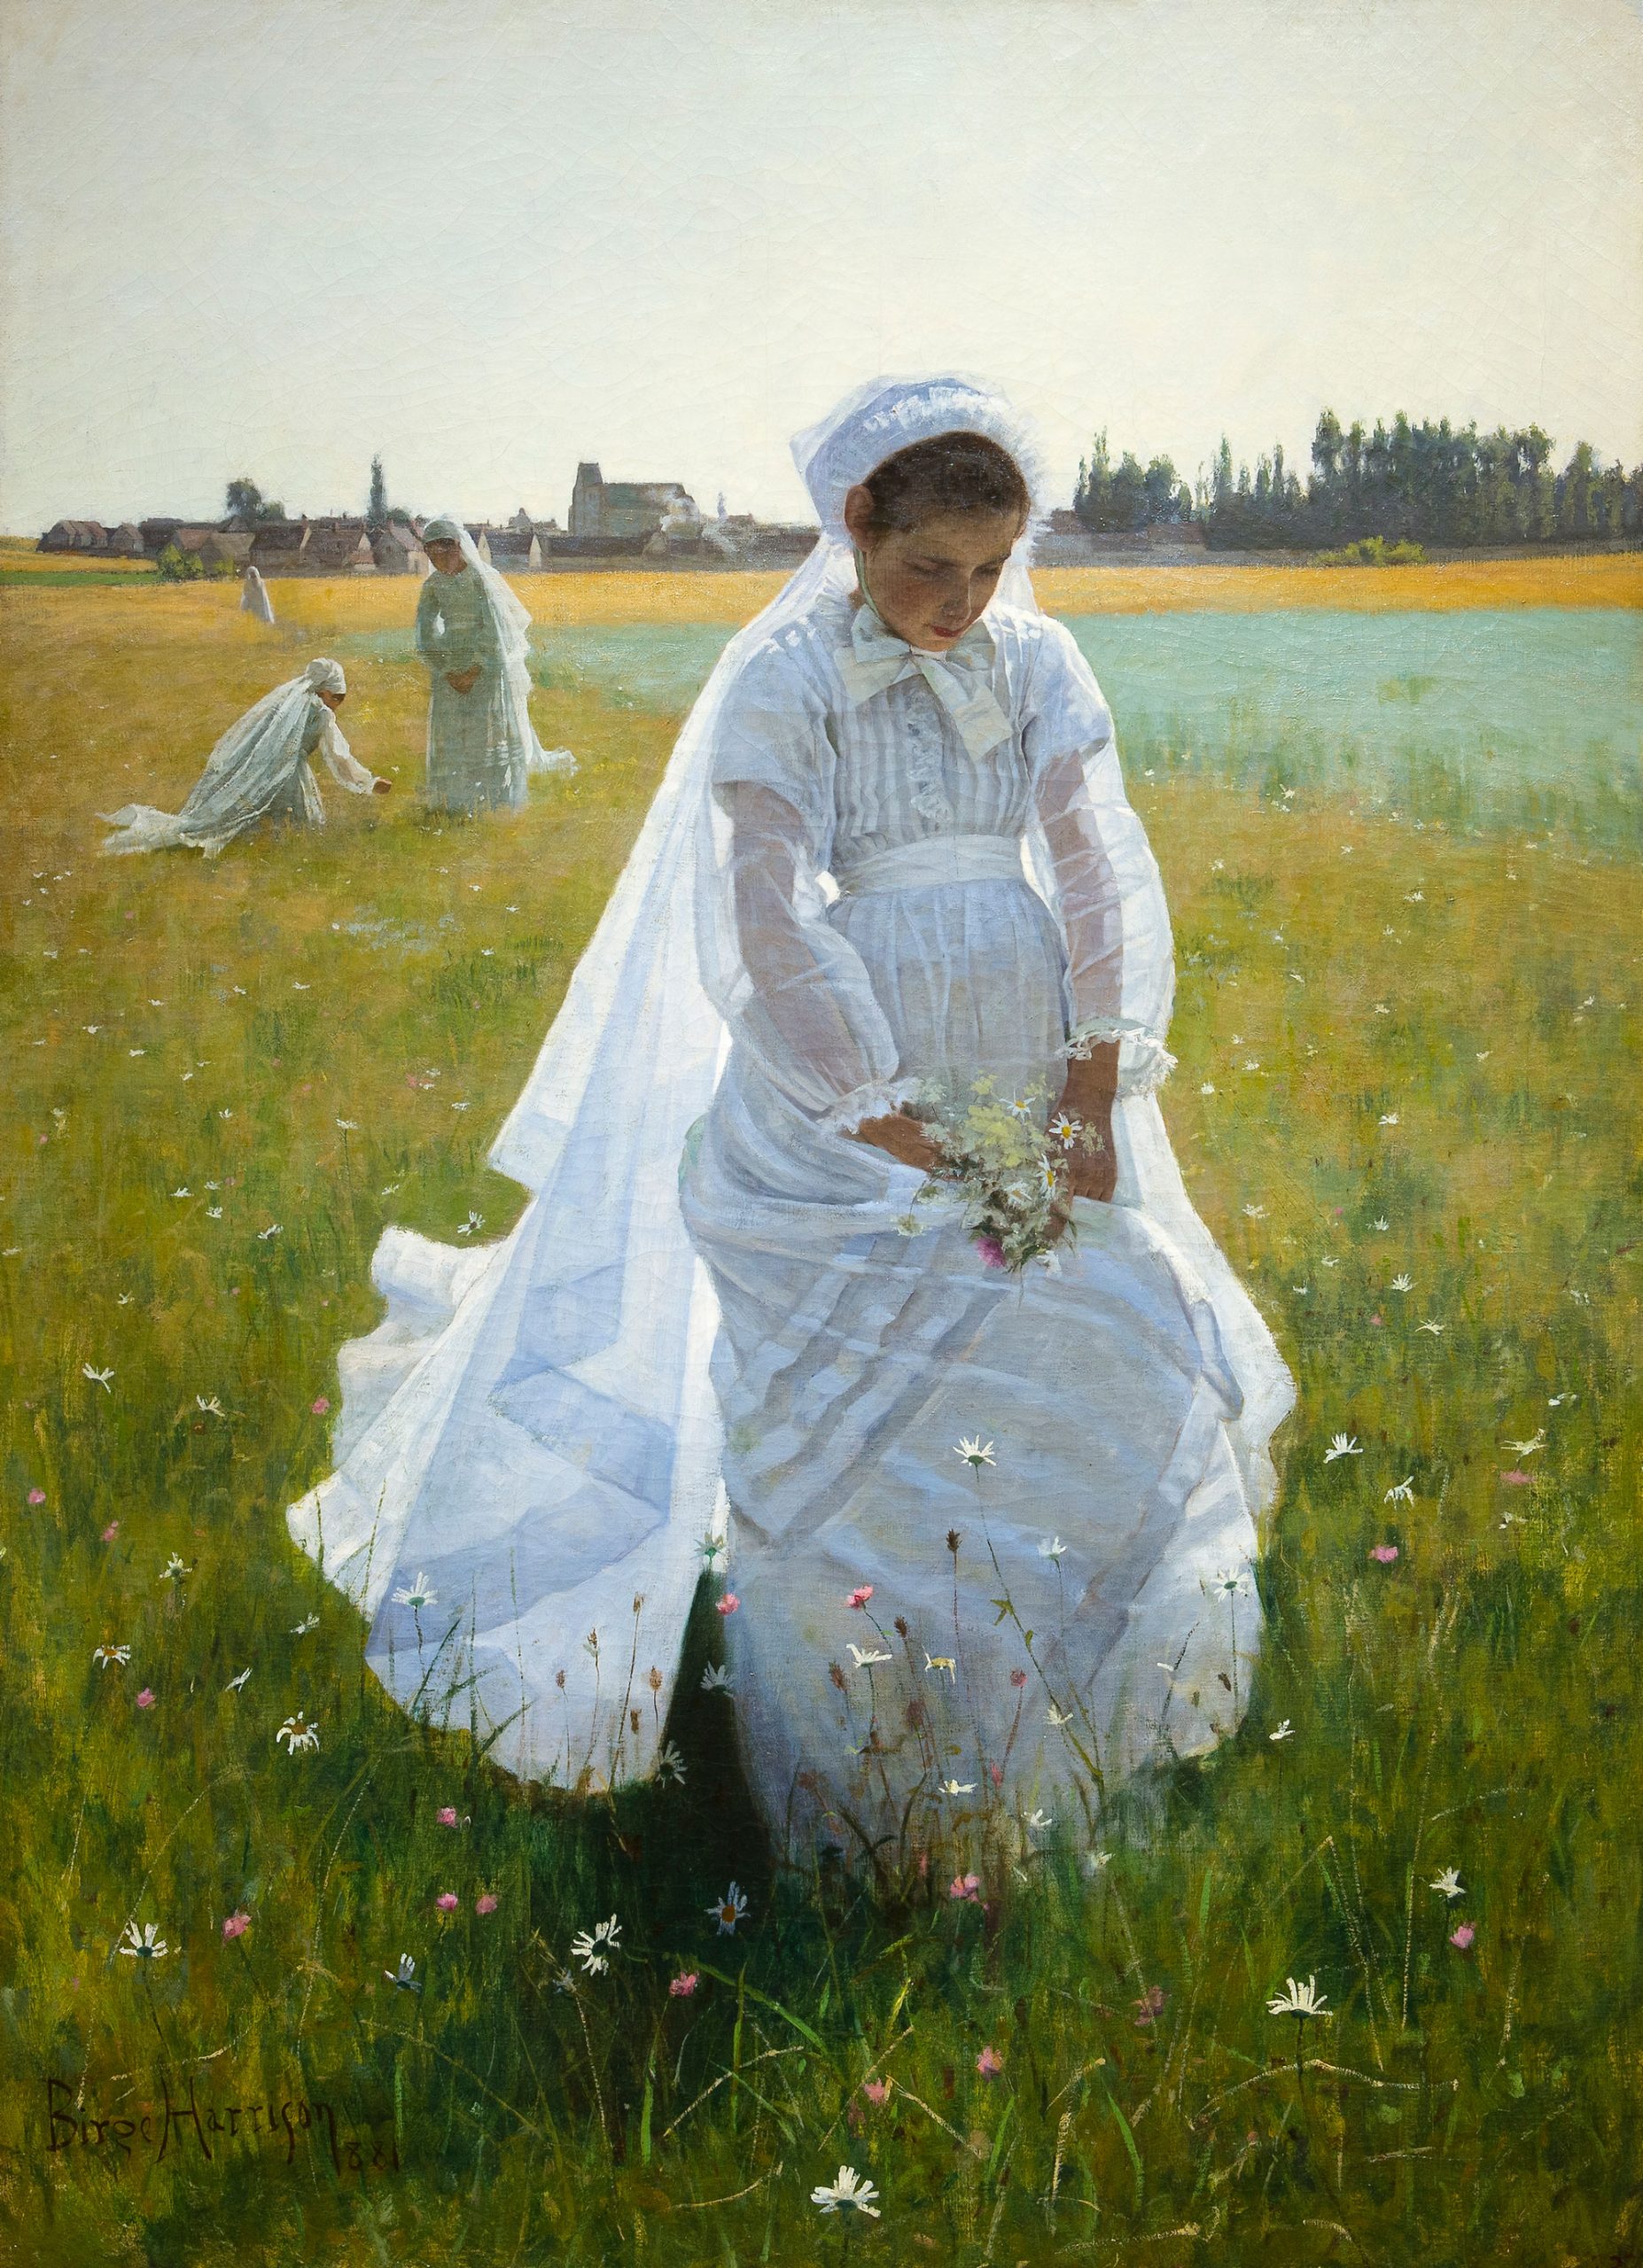 A young girl walks across a field, head down, wearing a communion gown.